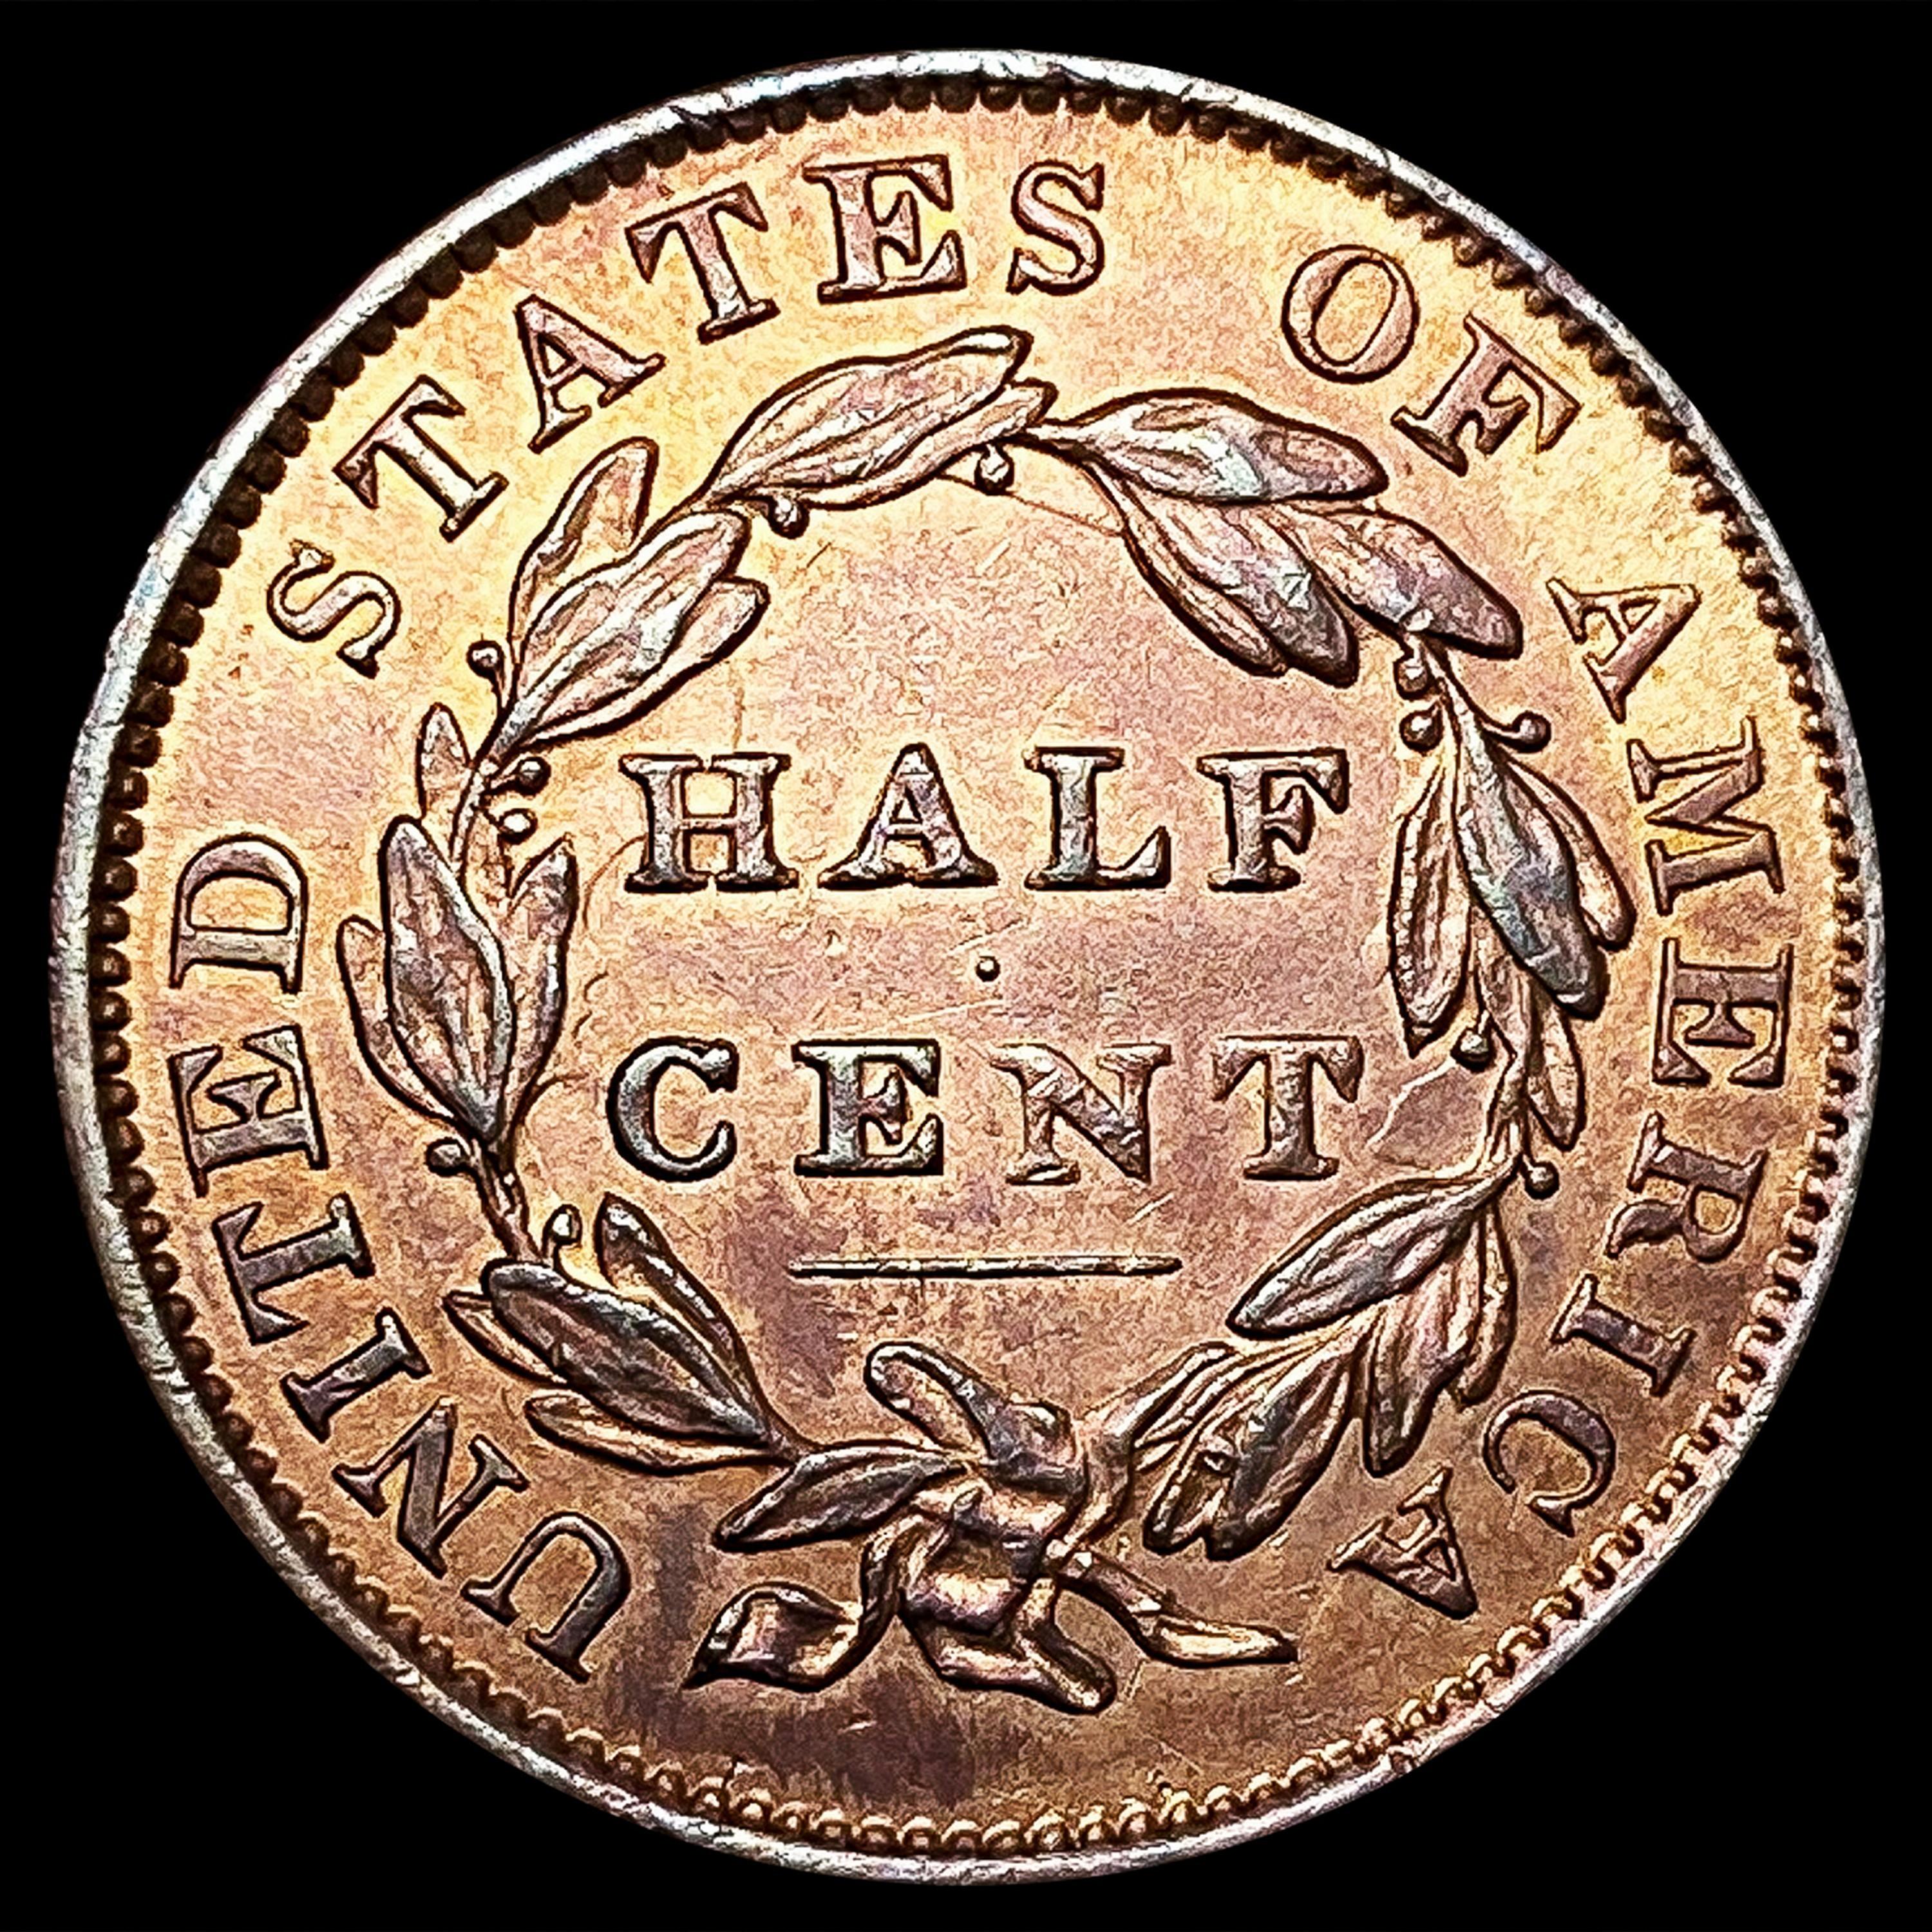 1834 Classic Head Half Cent CLOSELY UNCIRCULATED